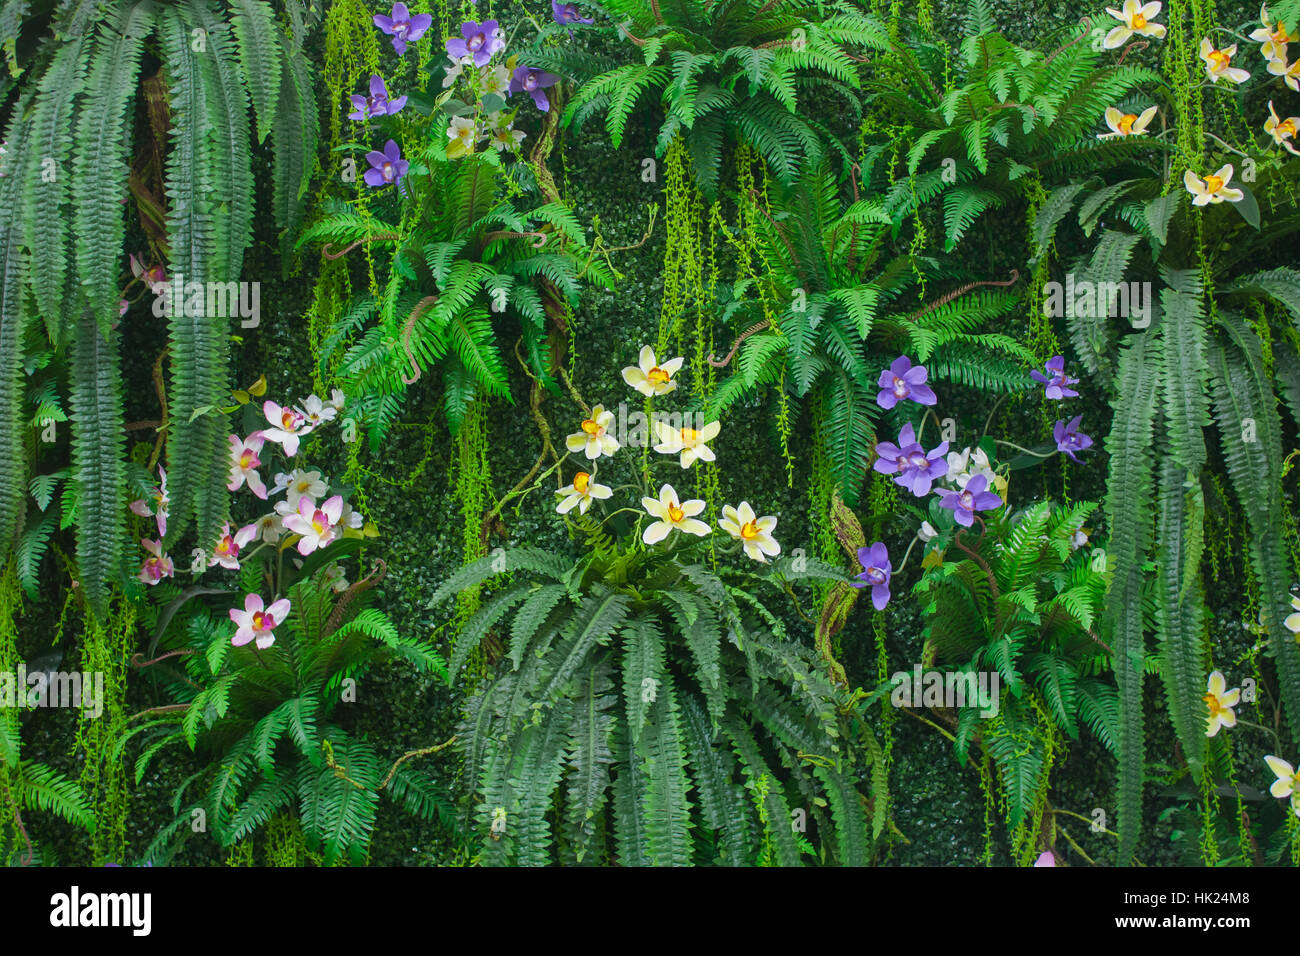 Green Fern Wall With Flower Background Stock Photo